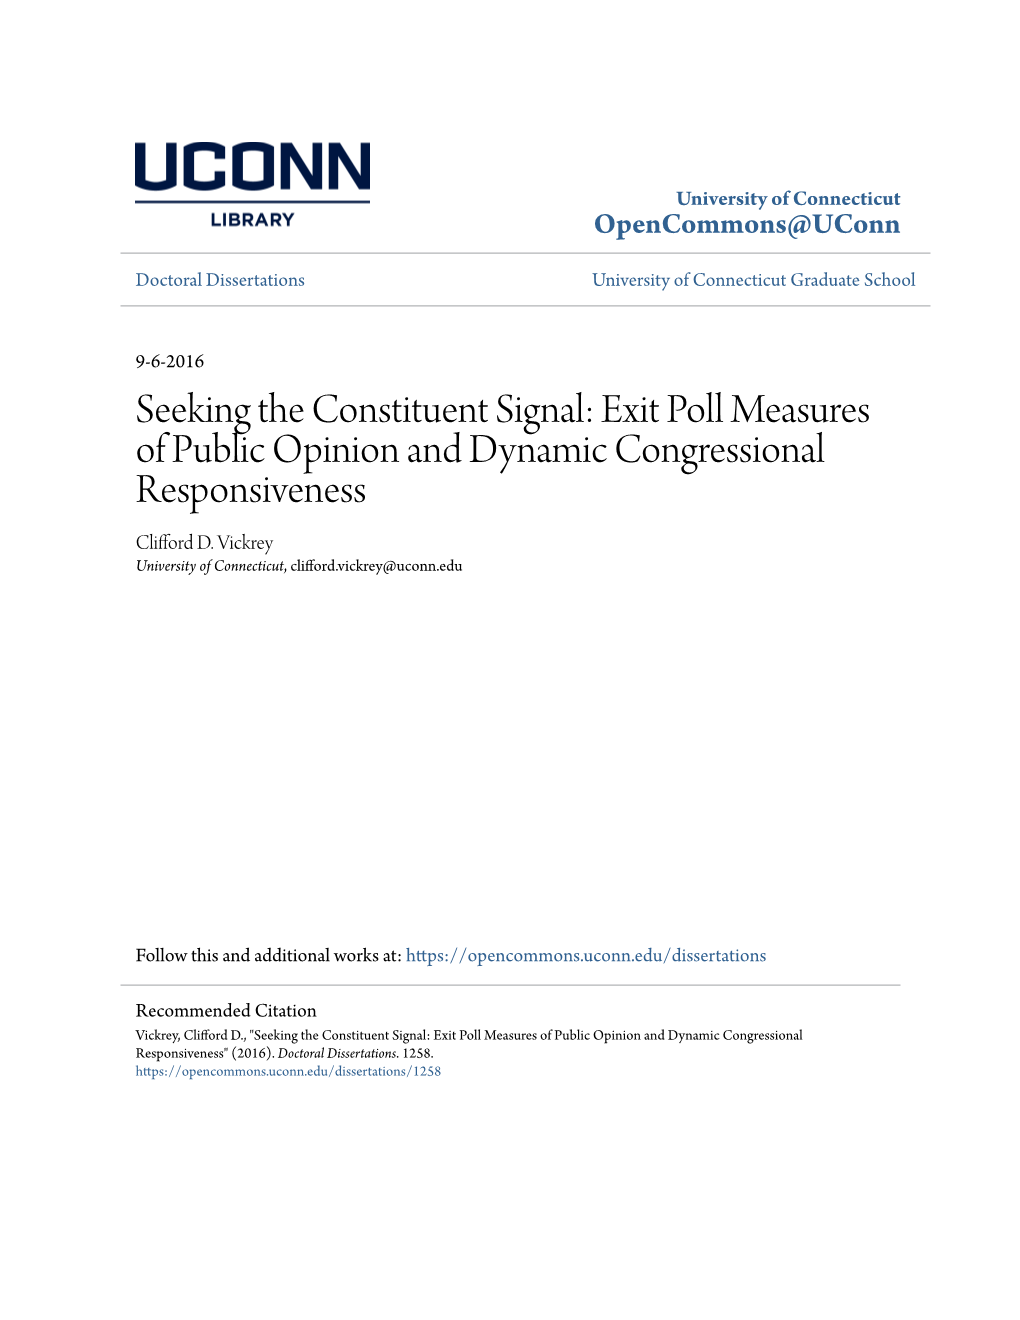 Seeking the Constituent Signal: Exit Poll Measures of Public Opinion and Dynamic Congressional Responsiveness Clifford D